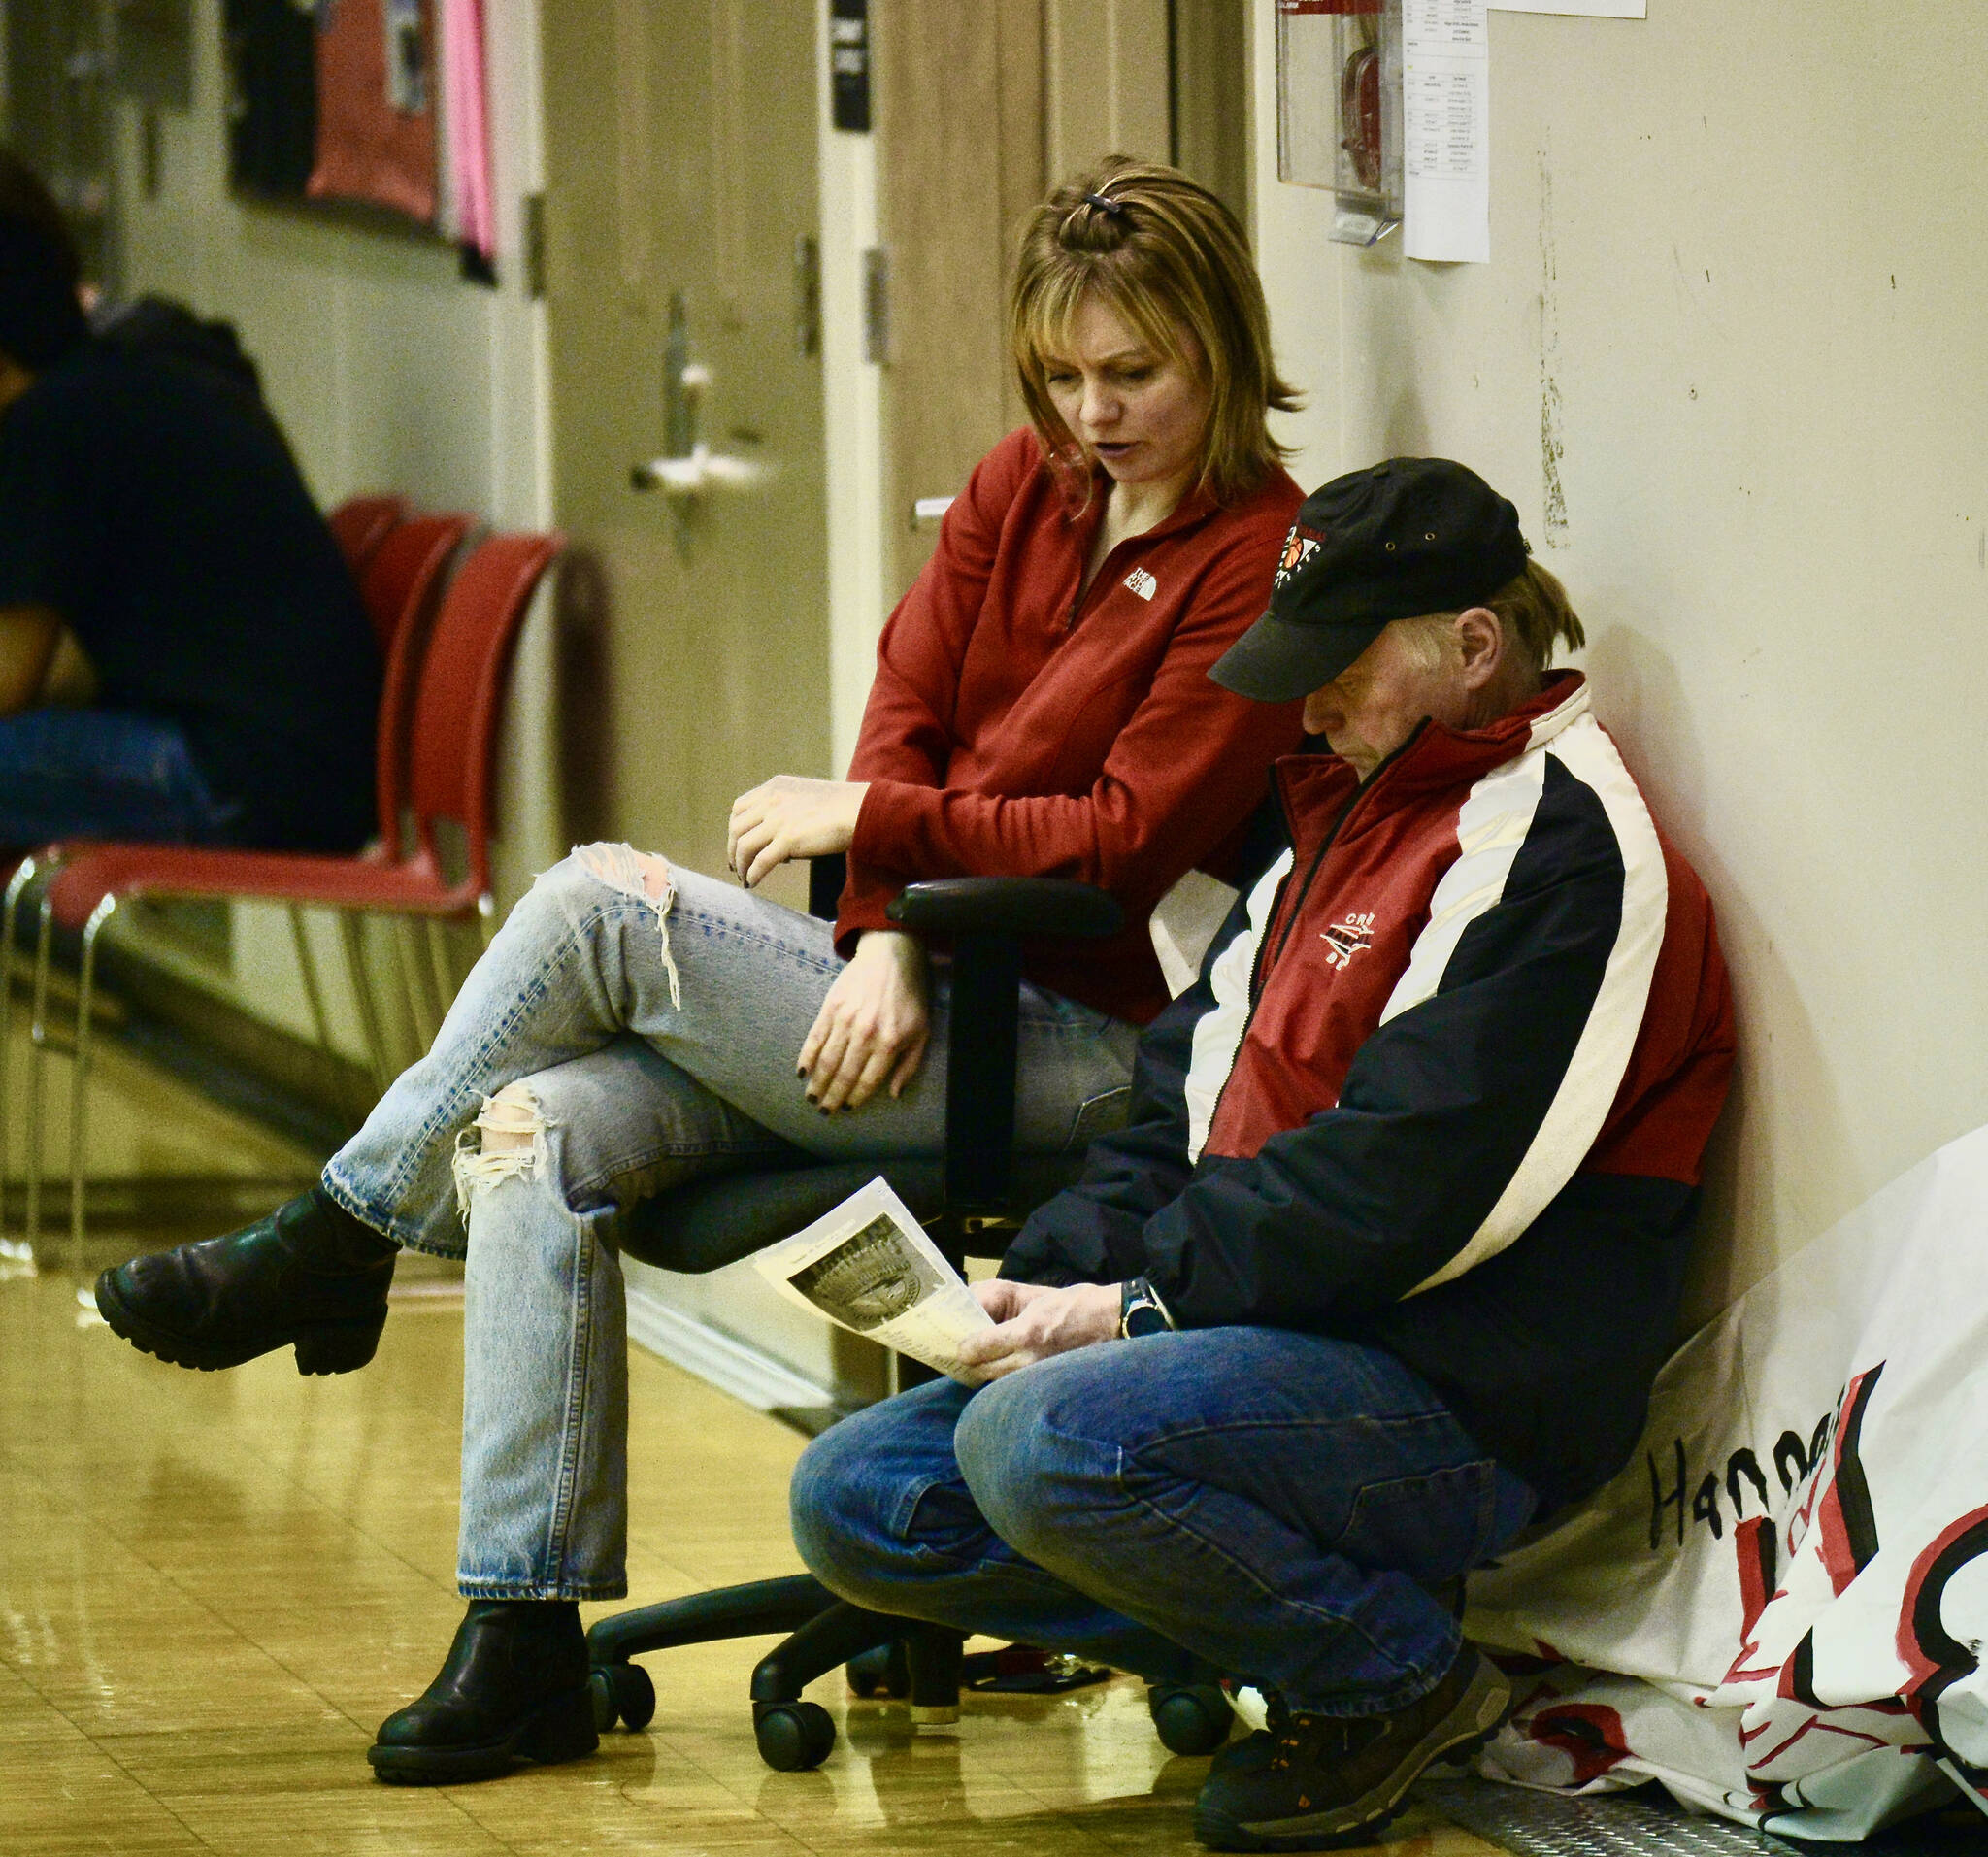 Juneau-Douglas High School teacher Kelly McCormick and George Houston look at a program during a February 2014 game. McCormick was a former student-teacher under Houston. (Klas Stolpe for the Juneau Empire)